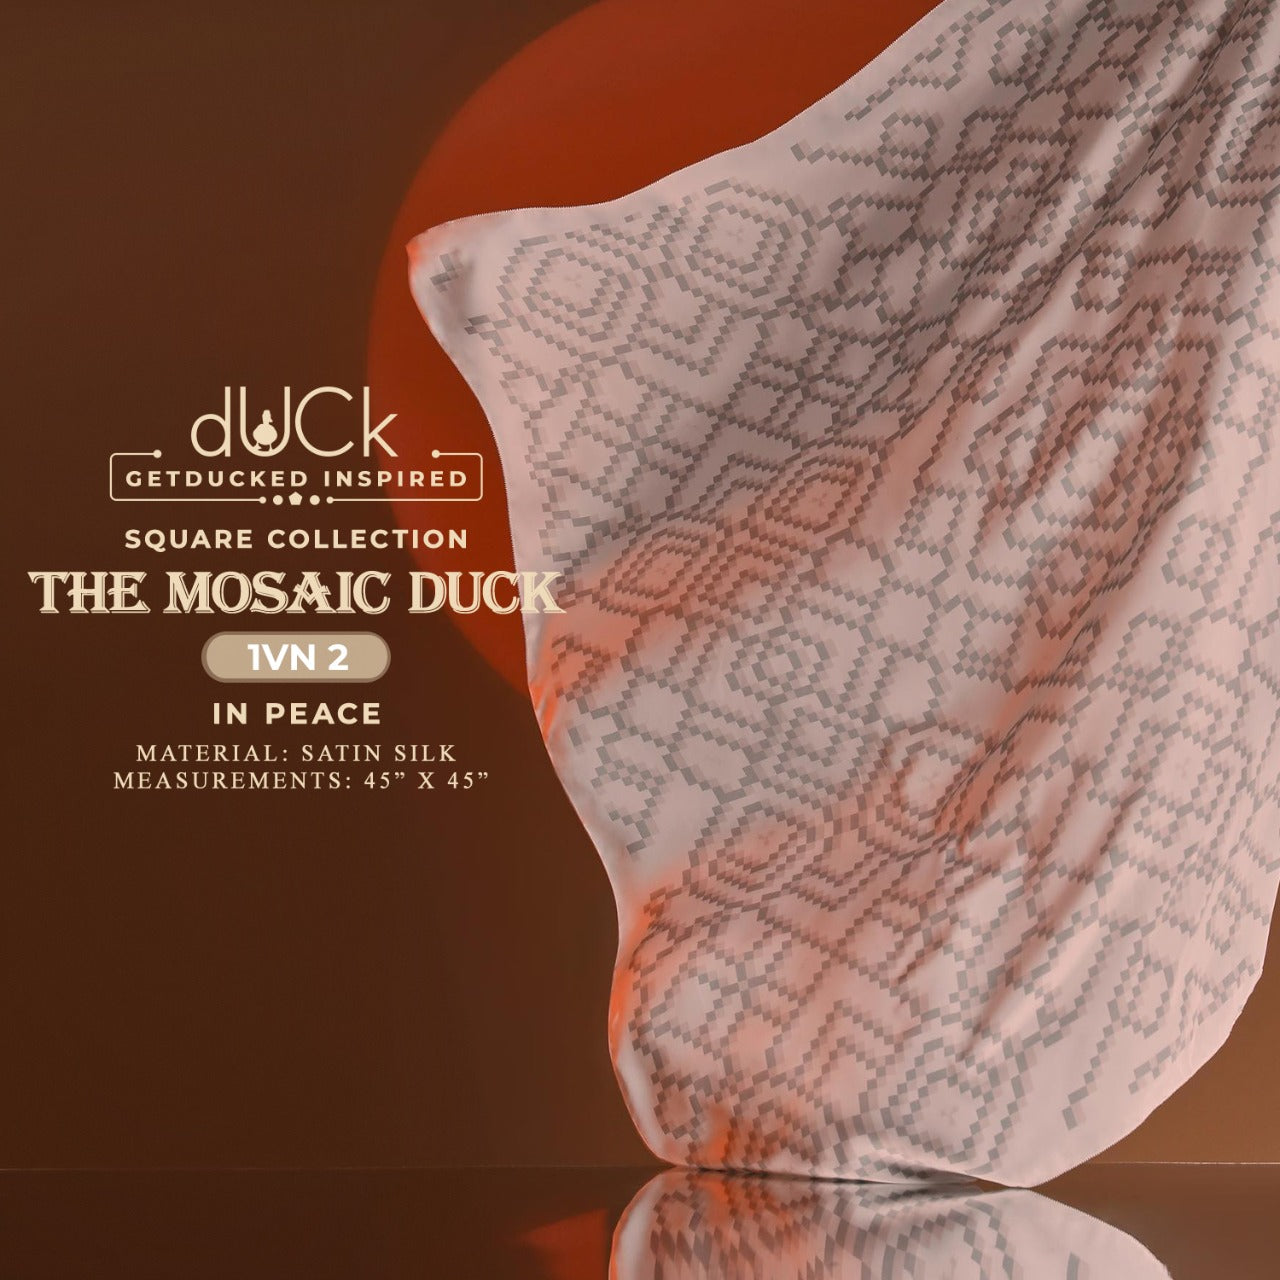 The Mosaic dUCk Inspired Square Collection